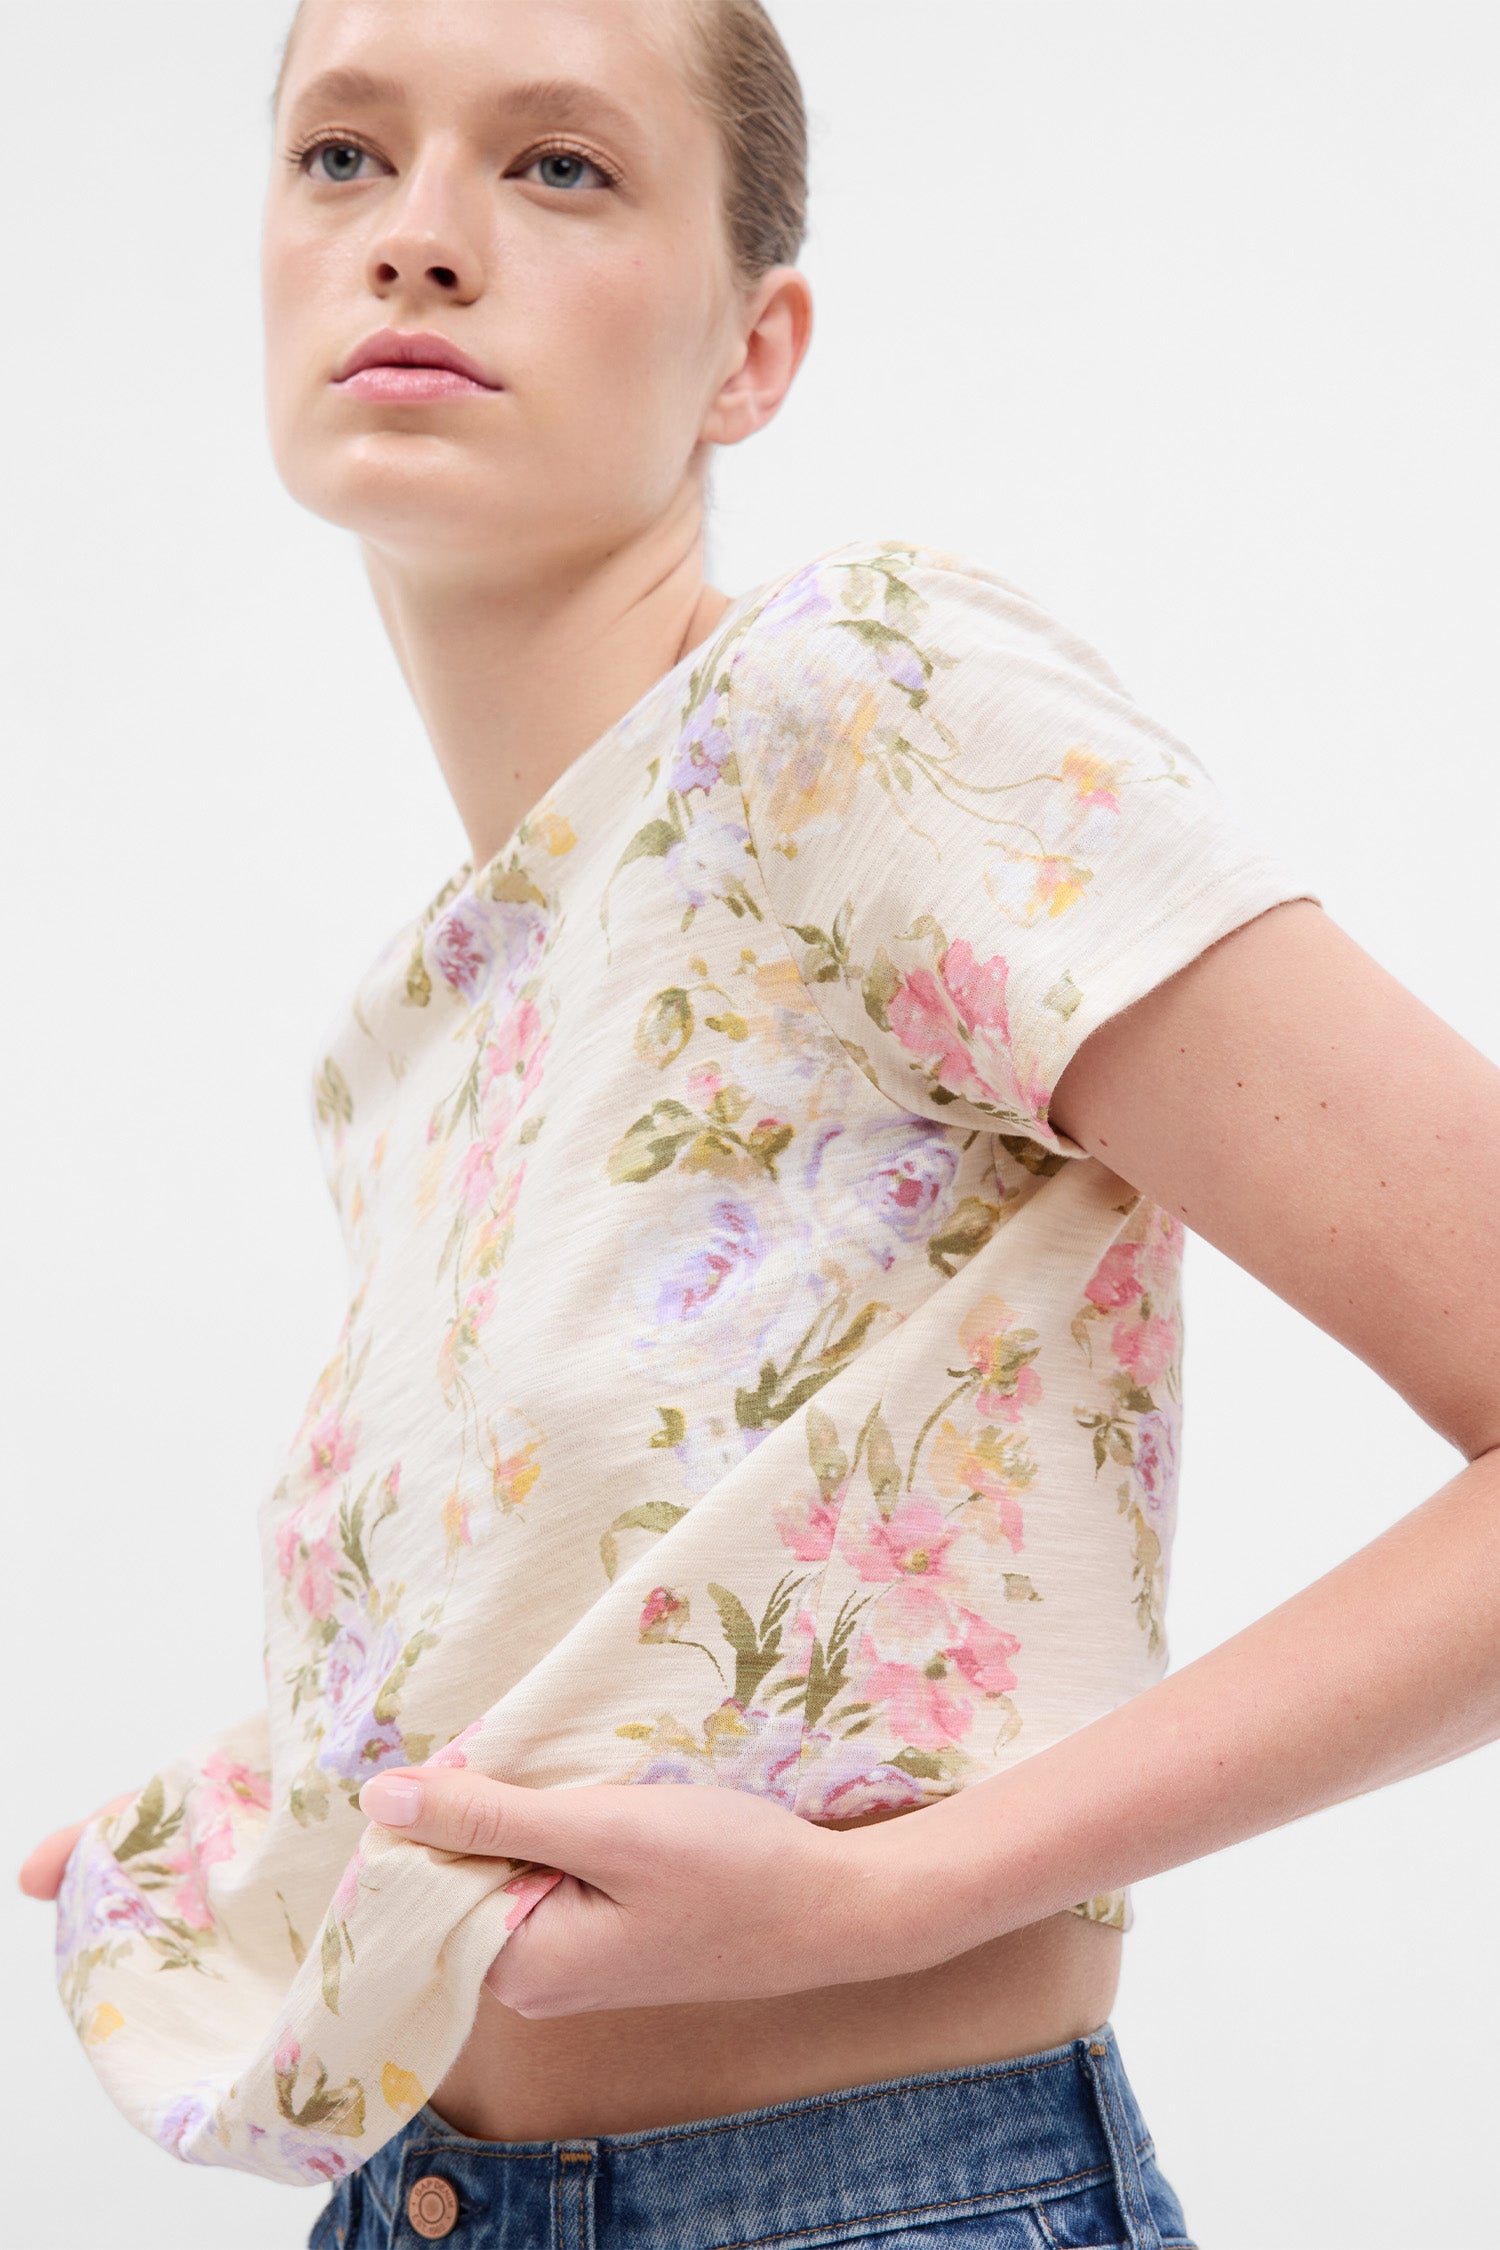 Model wearing cream floral t-shirt with pink, purple, yellow, and green floral print